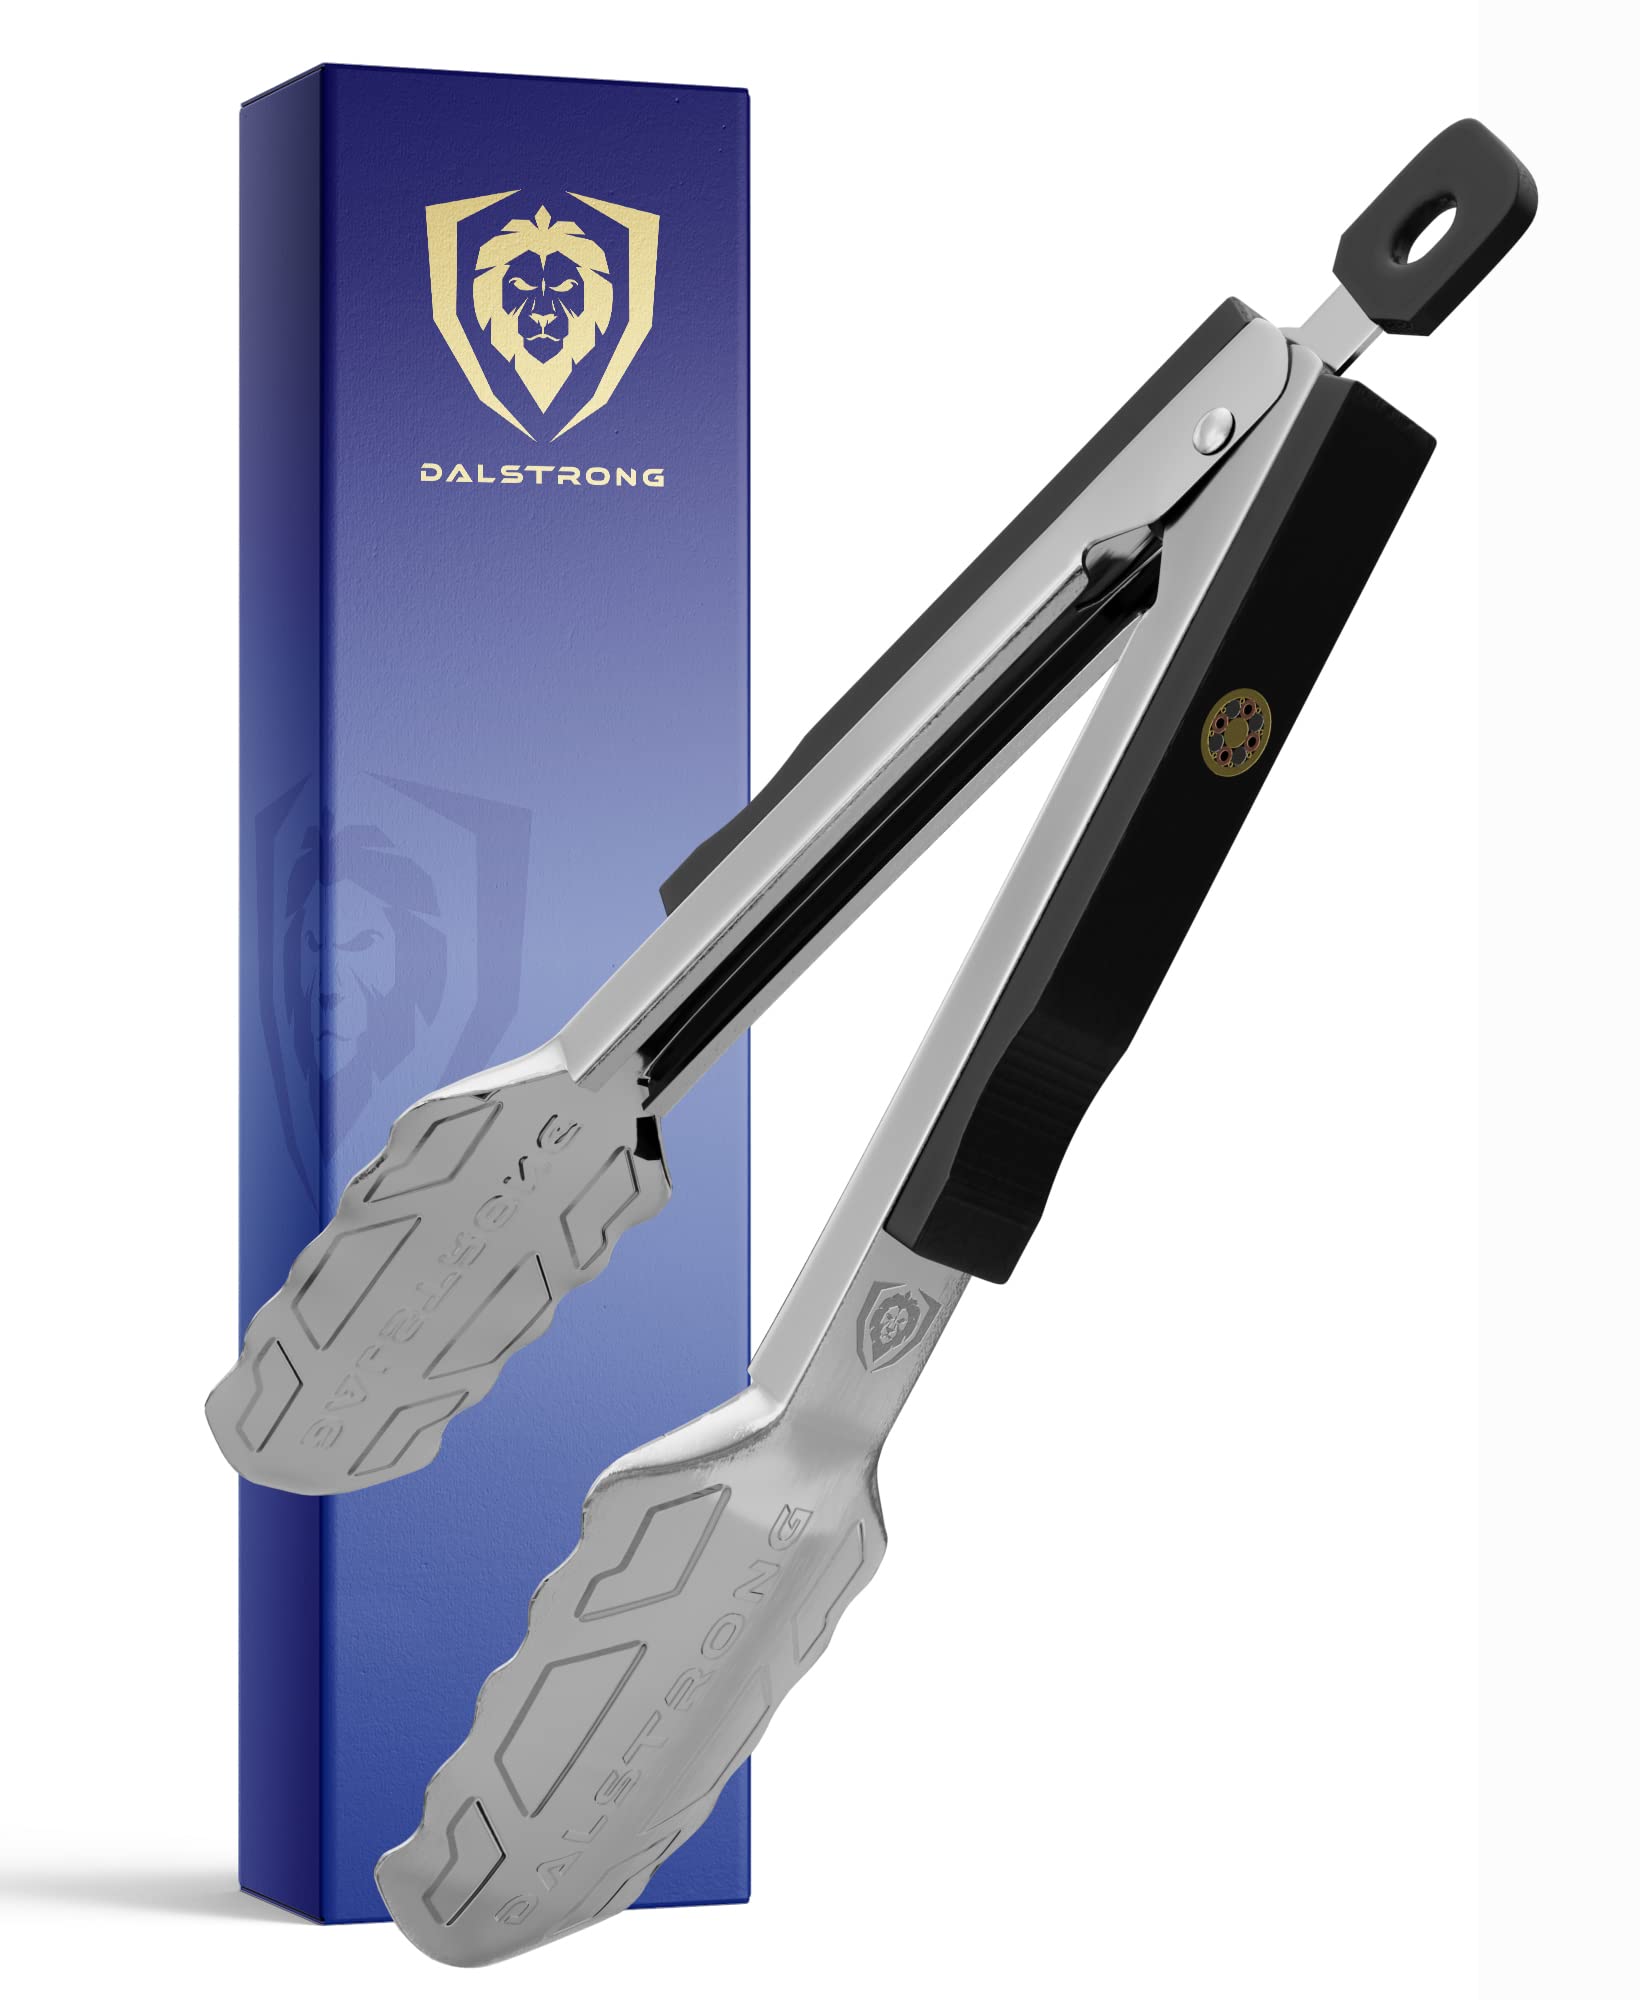 DALSTRONG Food Tongs - 9" Reach - High-Carbon Stainless Steel Arms & Scalloped Tips - G10 Handle Grips - Quick Lock Mechanism